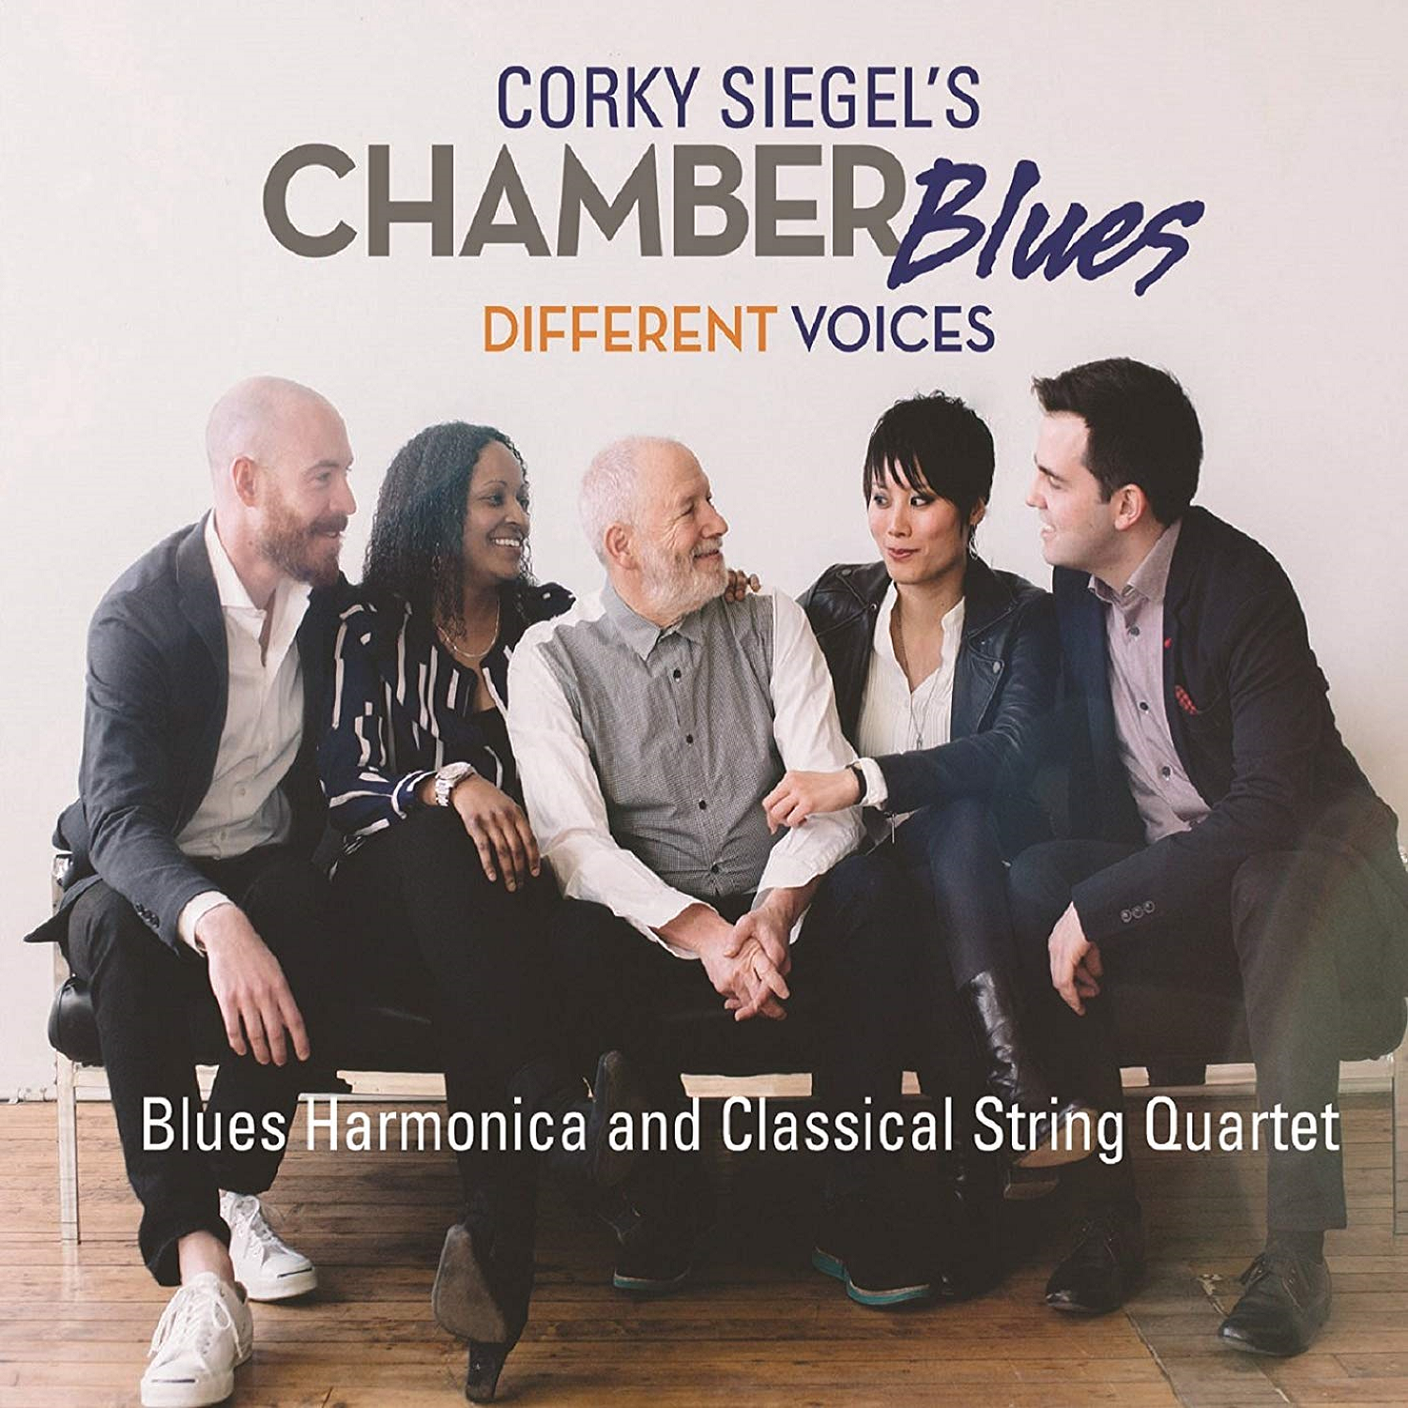 Corky Siegel's Chamber Blues; "Time Will Tell Overture - Op. 25"; Dawnserly Records (dettaglio copertina)